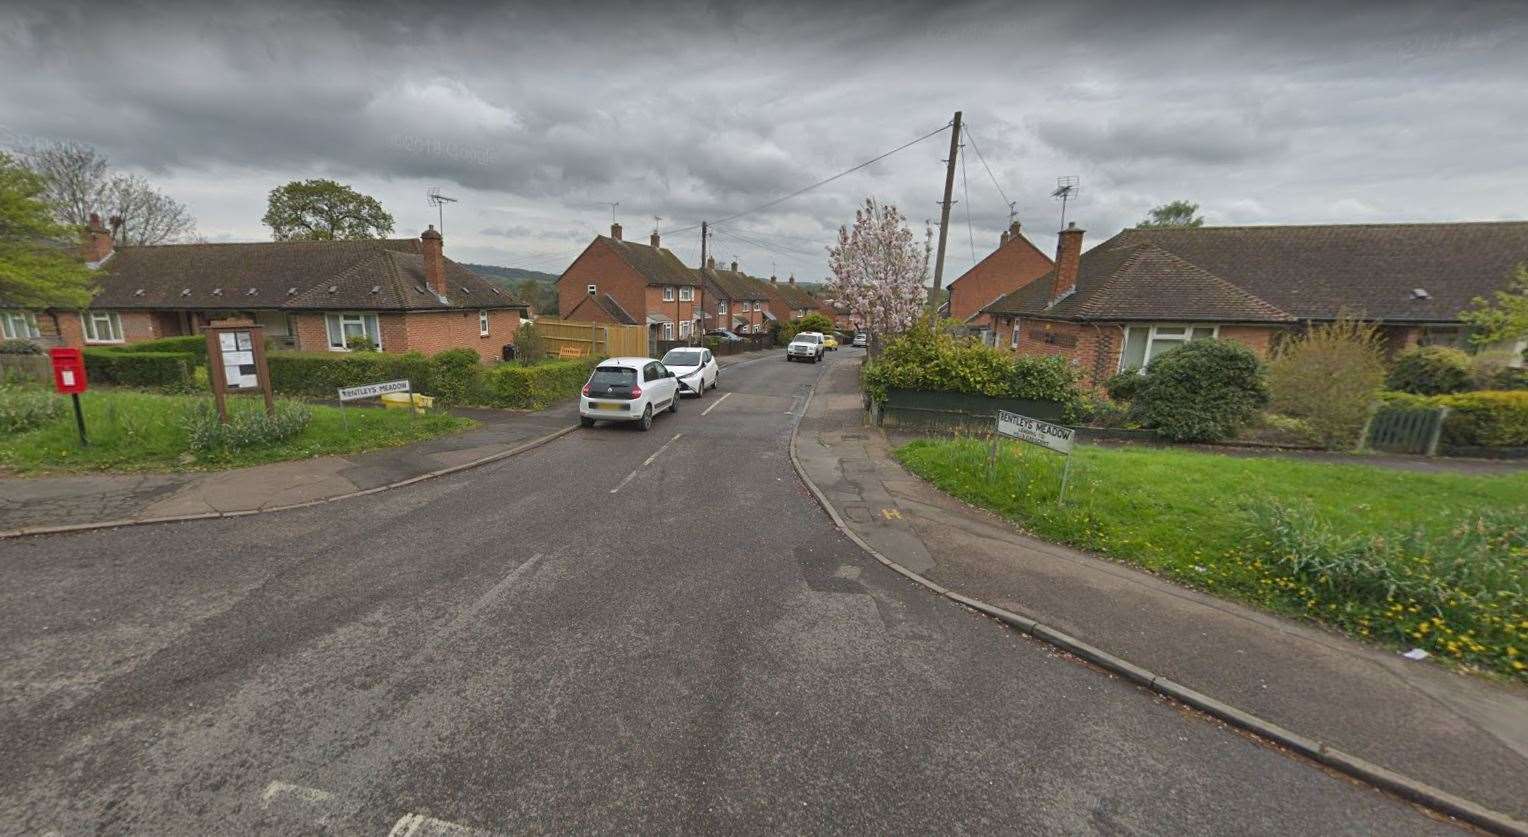 Police were called to the scene of the incident in Bentley's Meadow, Seal, on Saturday night. Picture: Google